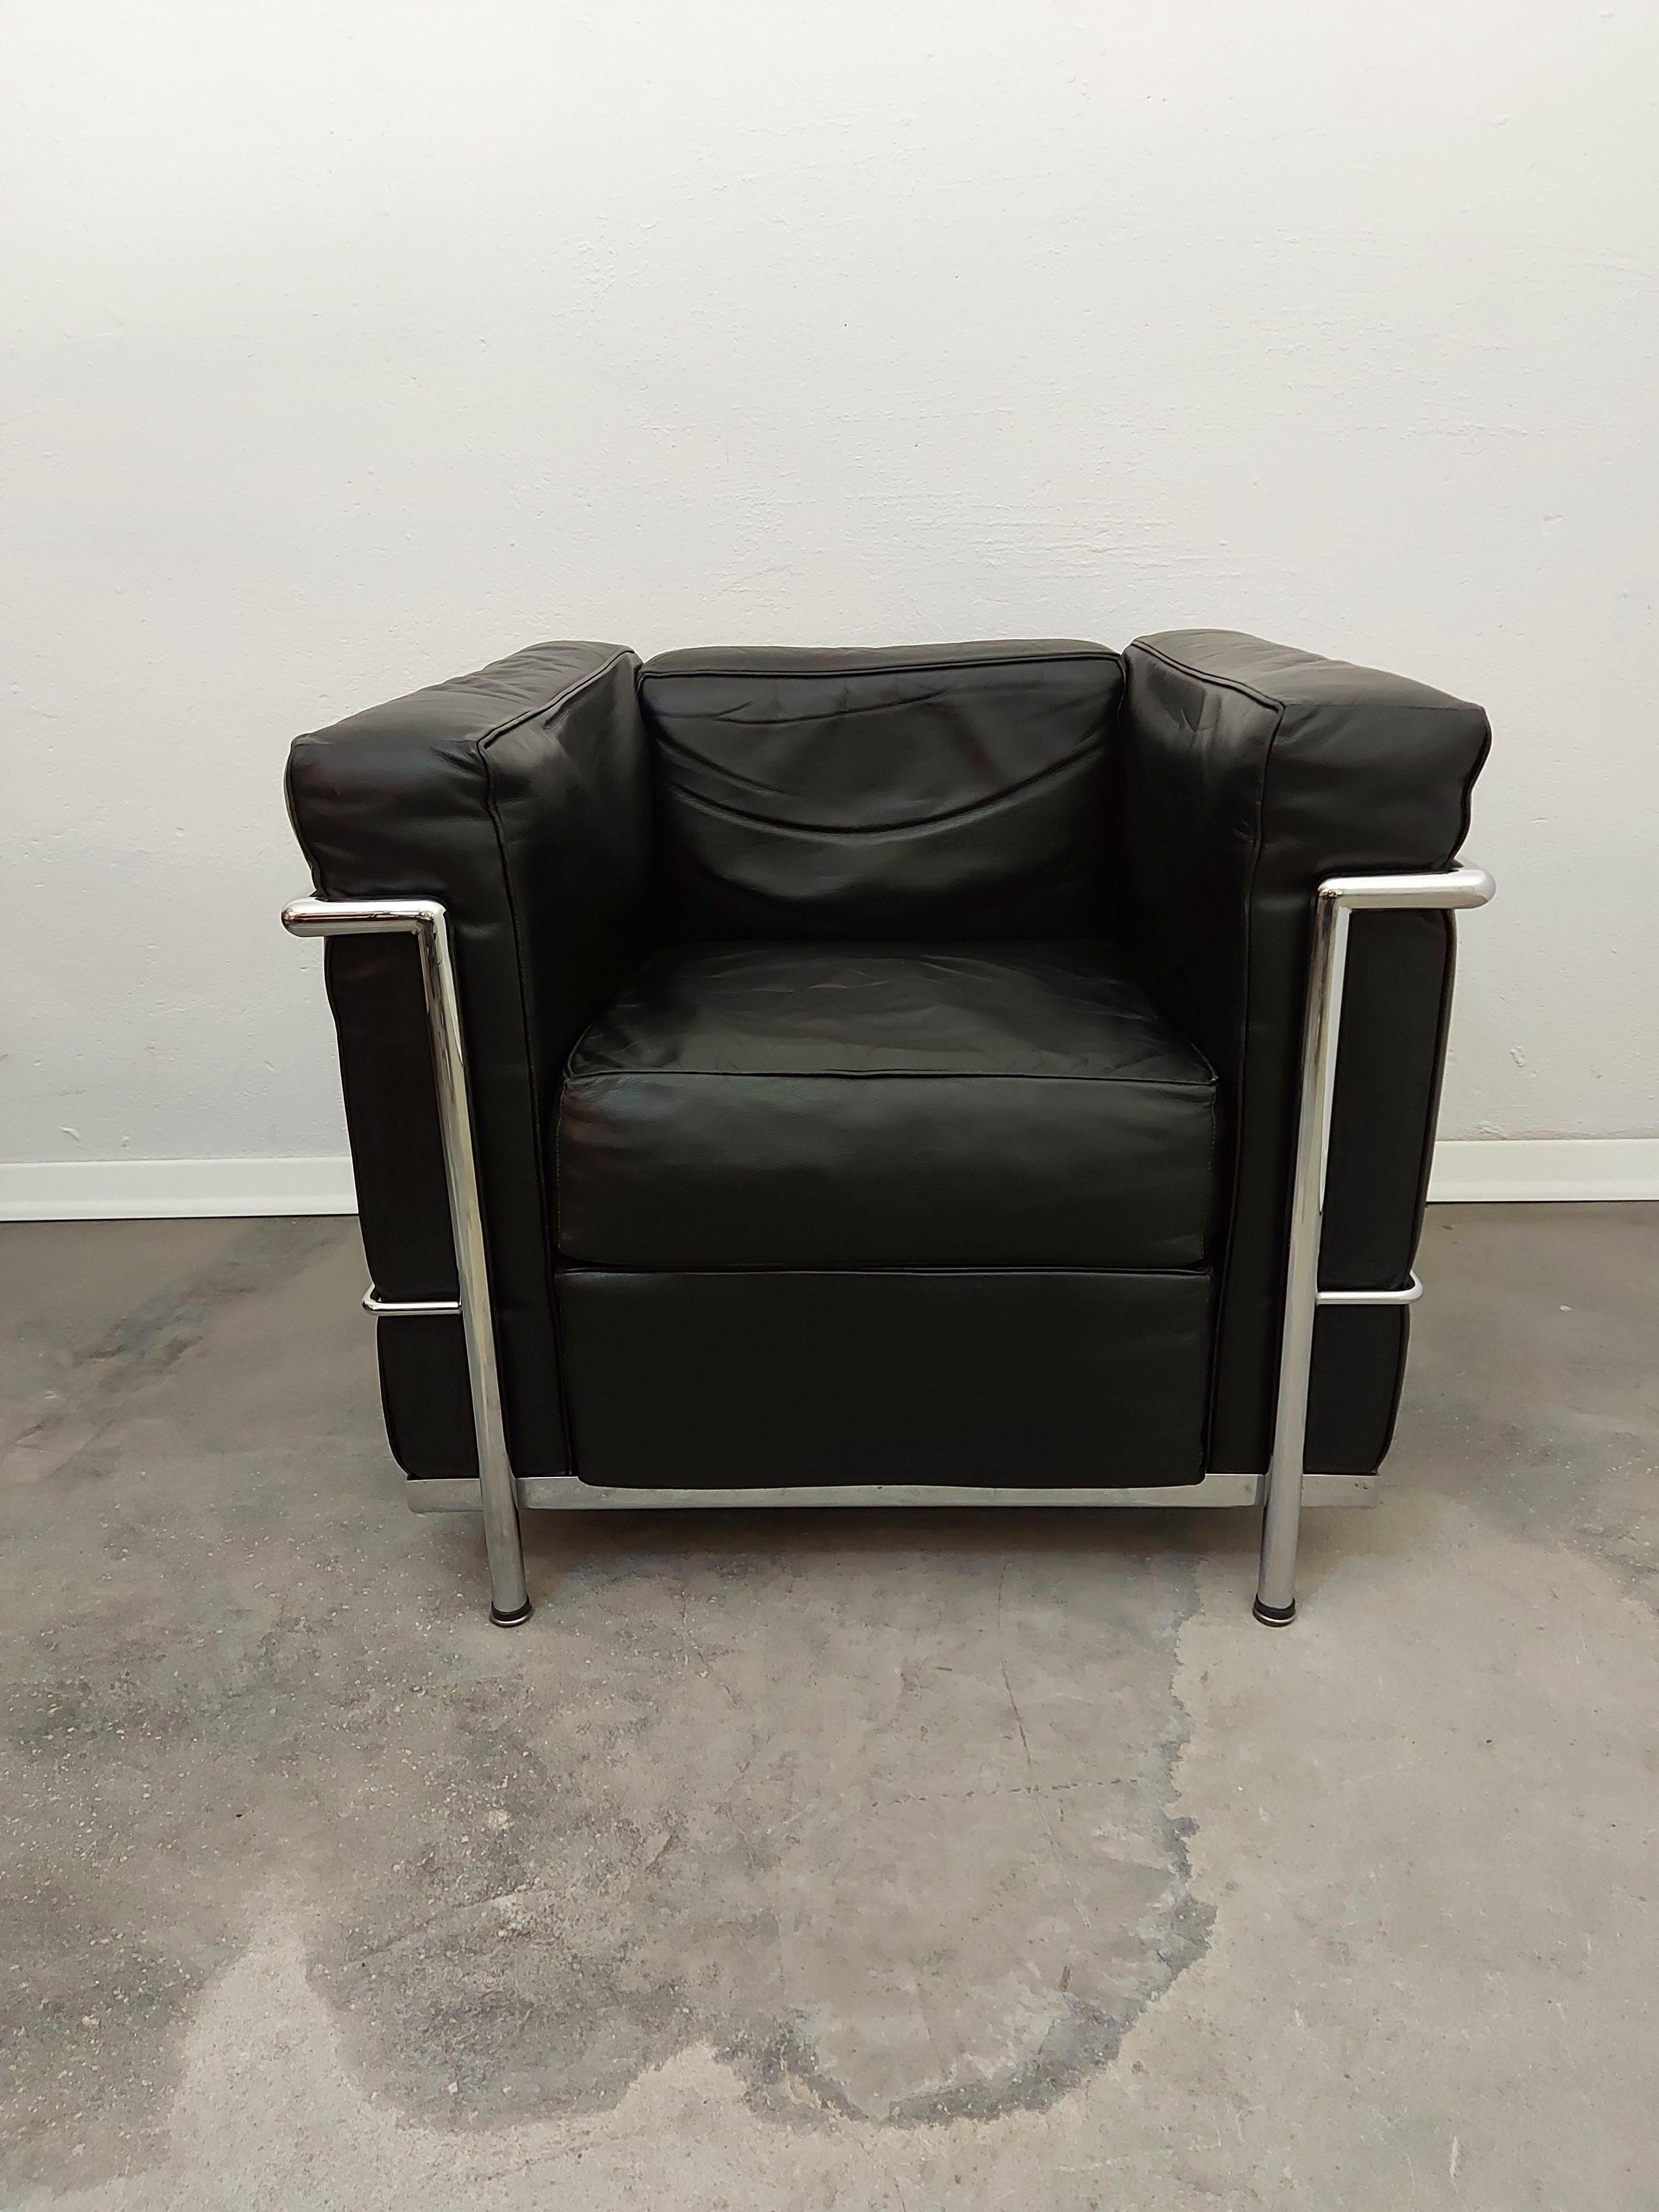 Condition: The leather and chrome are in mint condition.
Manufacturer: made in Italy, 1990s
Style: Design Classics, Midcentury Modern
Materials: Leather, Chrome
Color: Black, silver